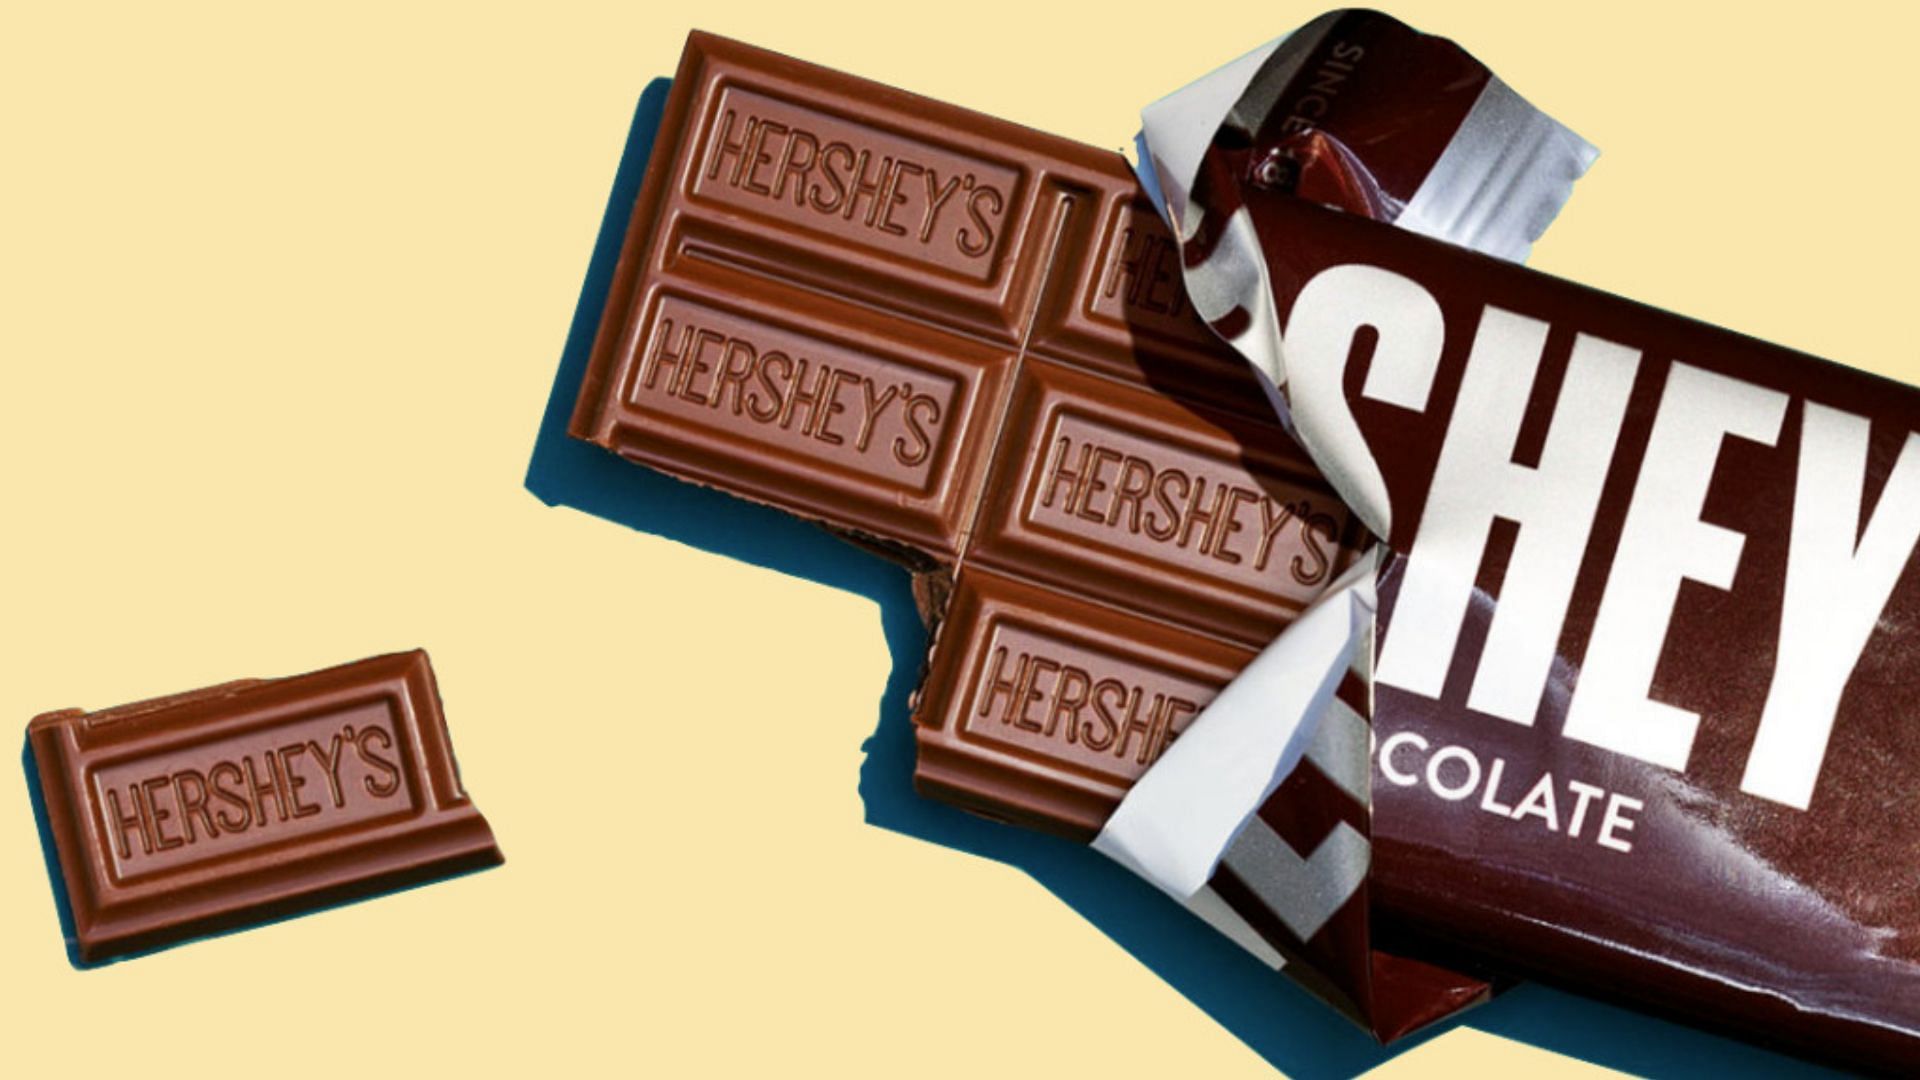 promotional image of the concerned dark chocolate (Image via Hershey&rsquo;s)